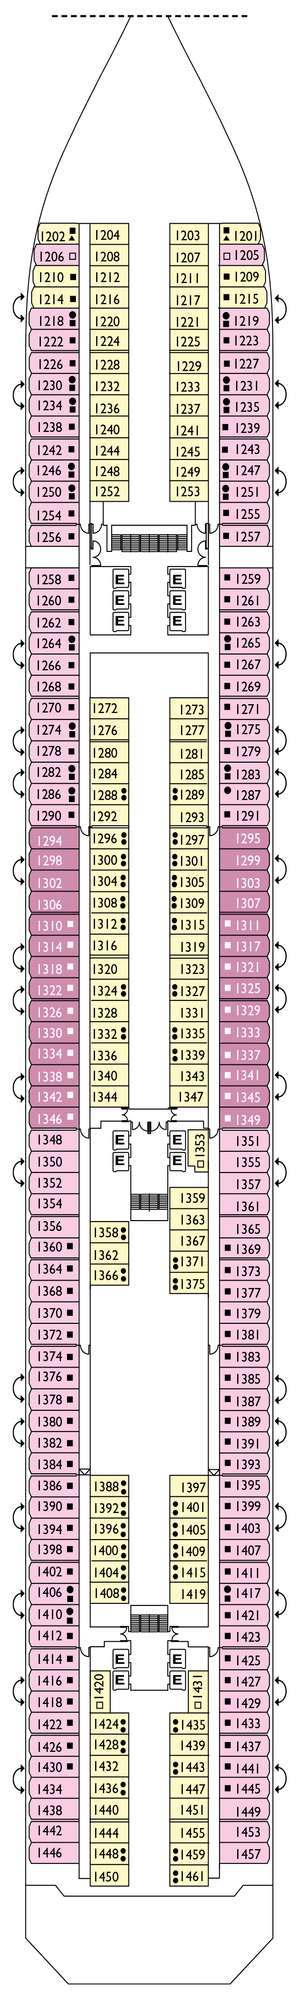 Deck plan for Costa Pacifica